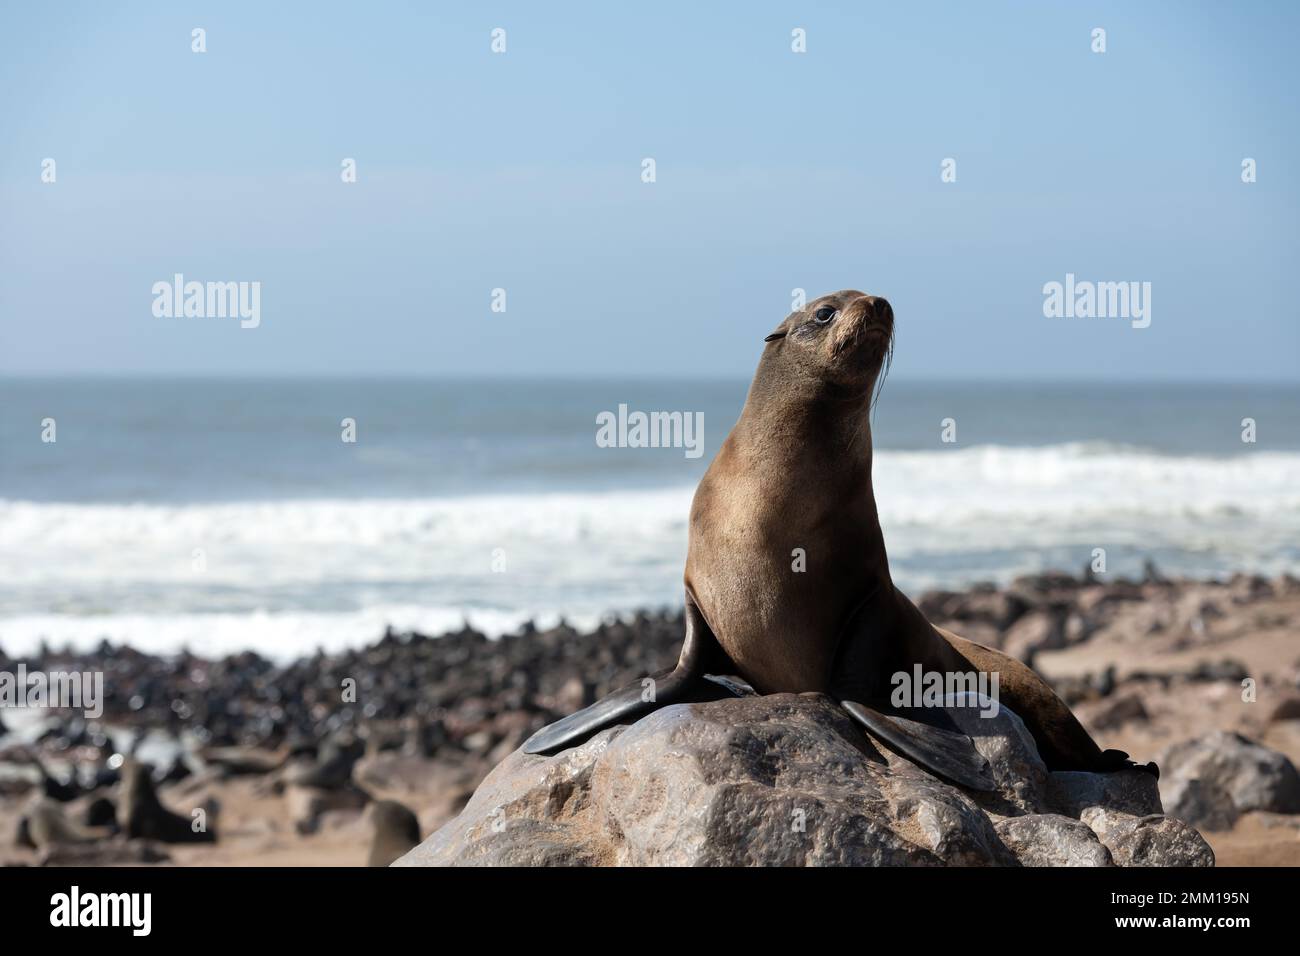 Fur seal enjoy the heat of the sun at the Cape Cross seal colony in Namibia, Africa. Wildlife photography Stock Photo